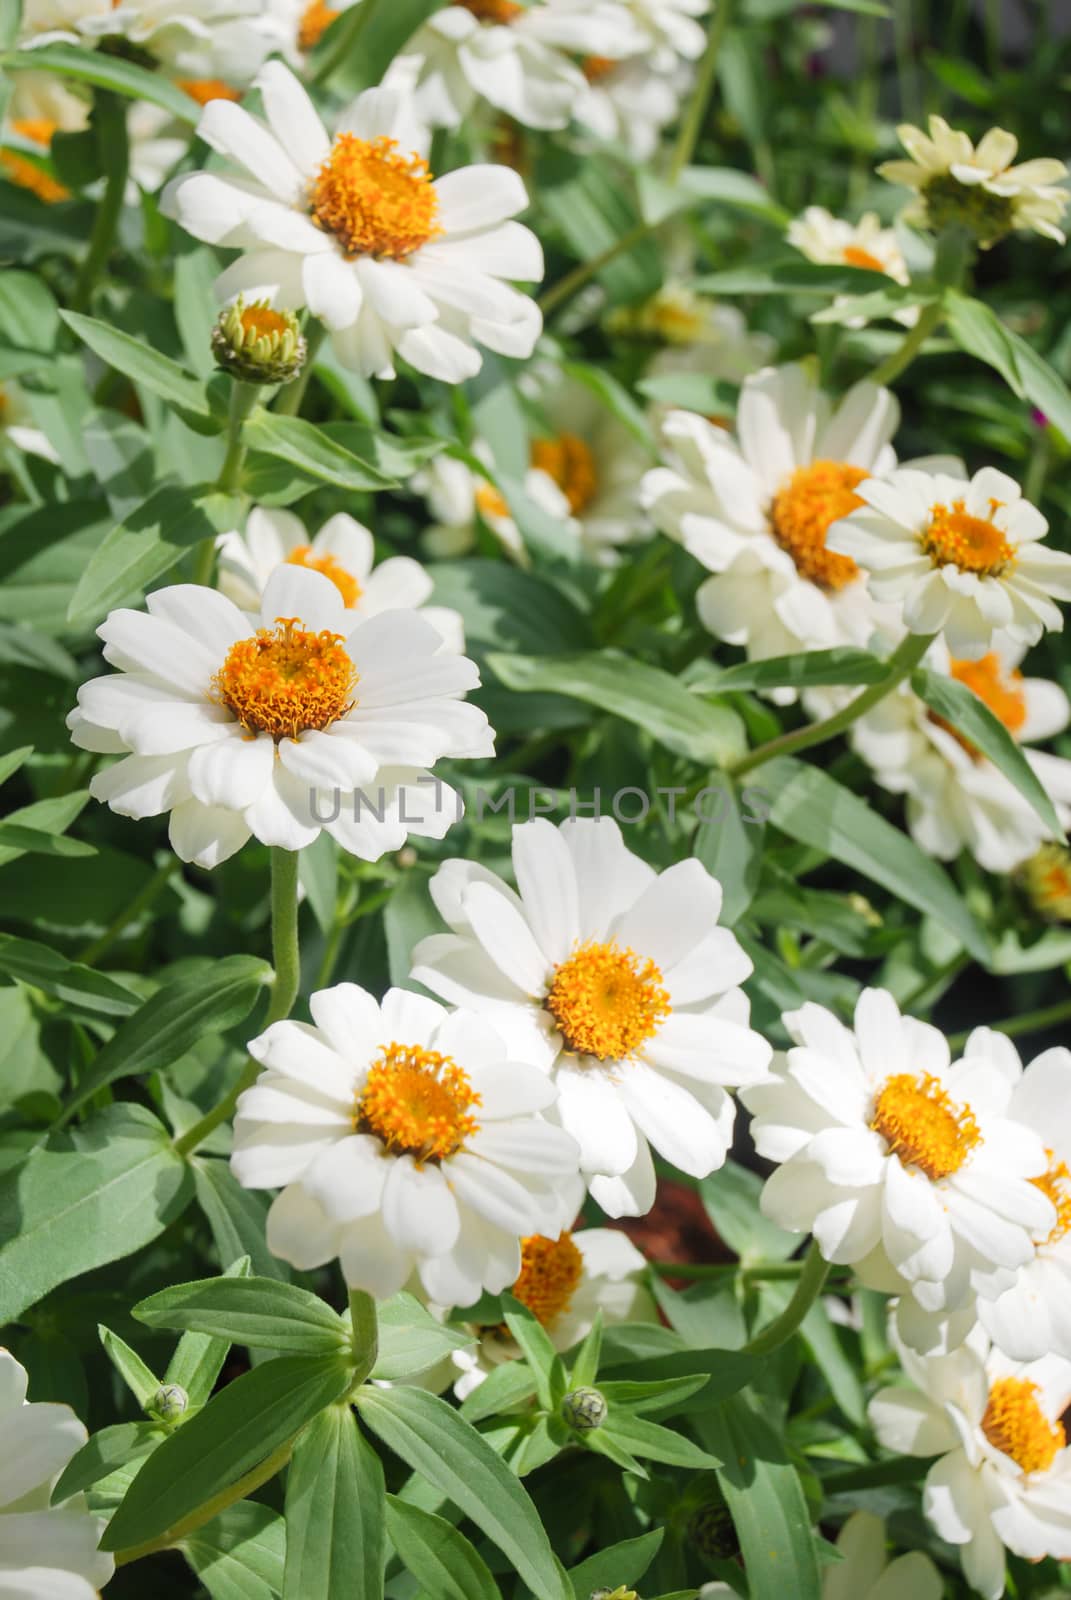 Zinnia growing in a pot with a shallow focus, dwarf zinnia by yuiyuize